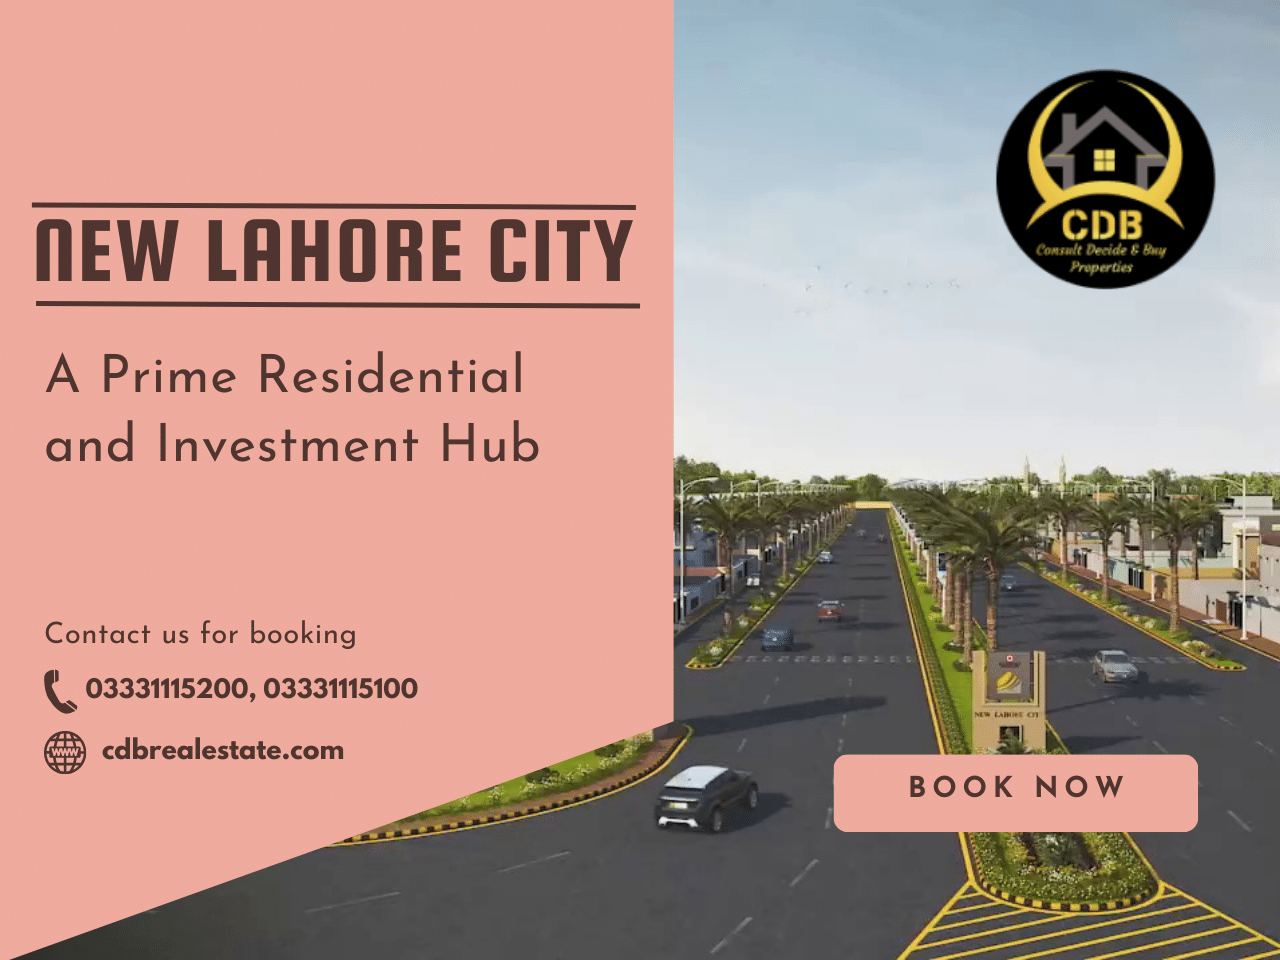 New Lahore City Residential and Investment